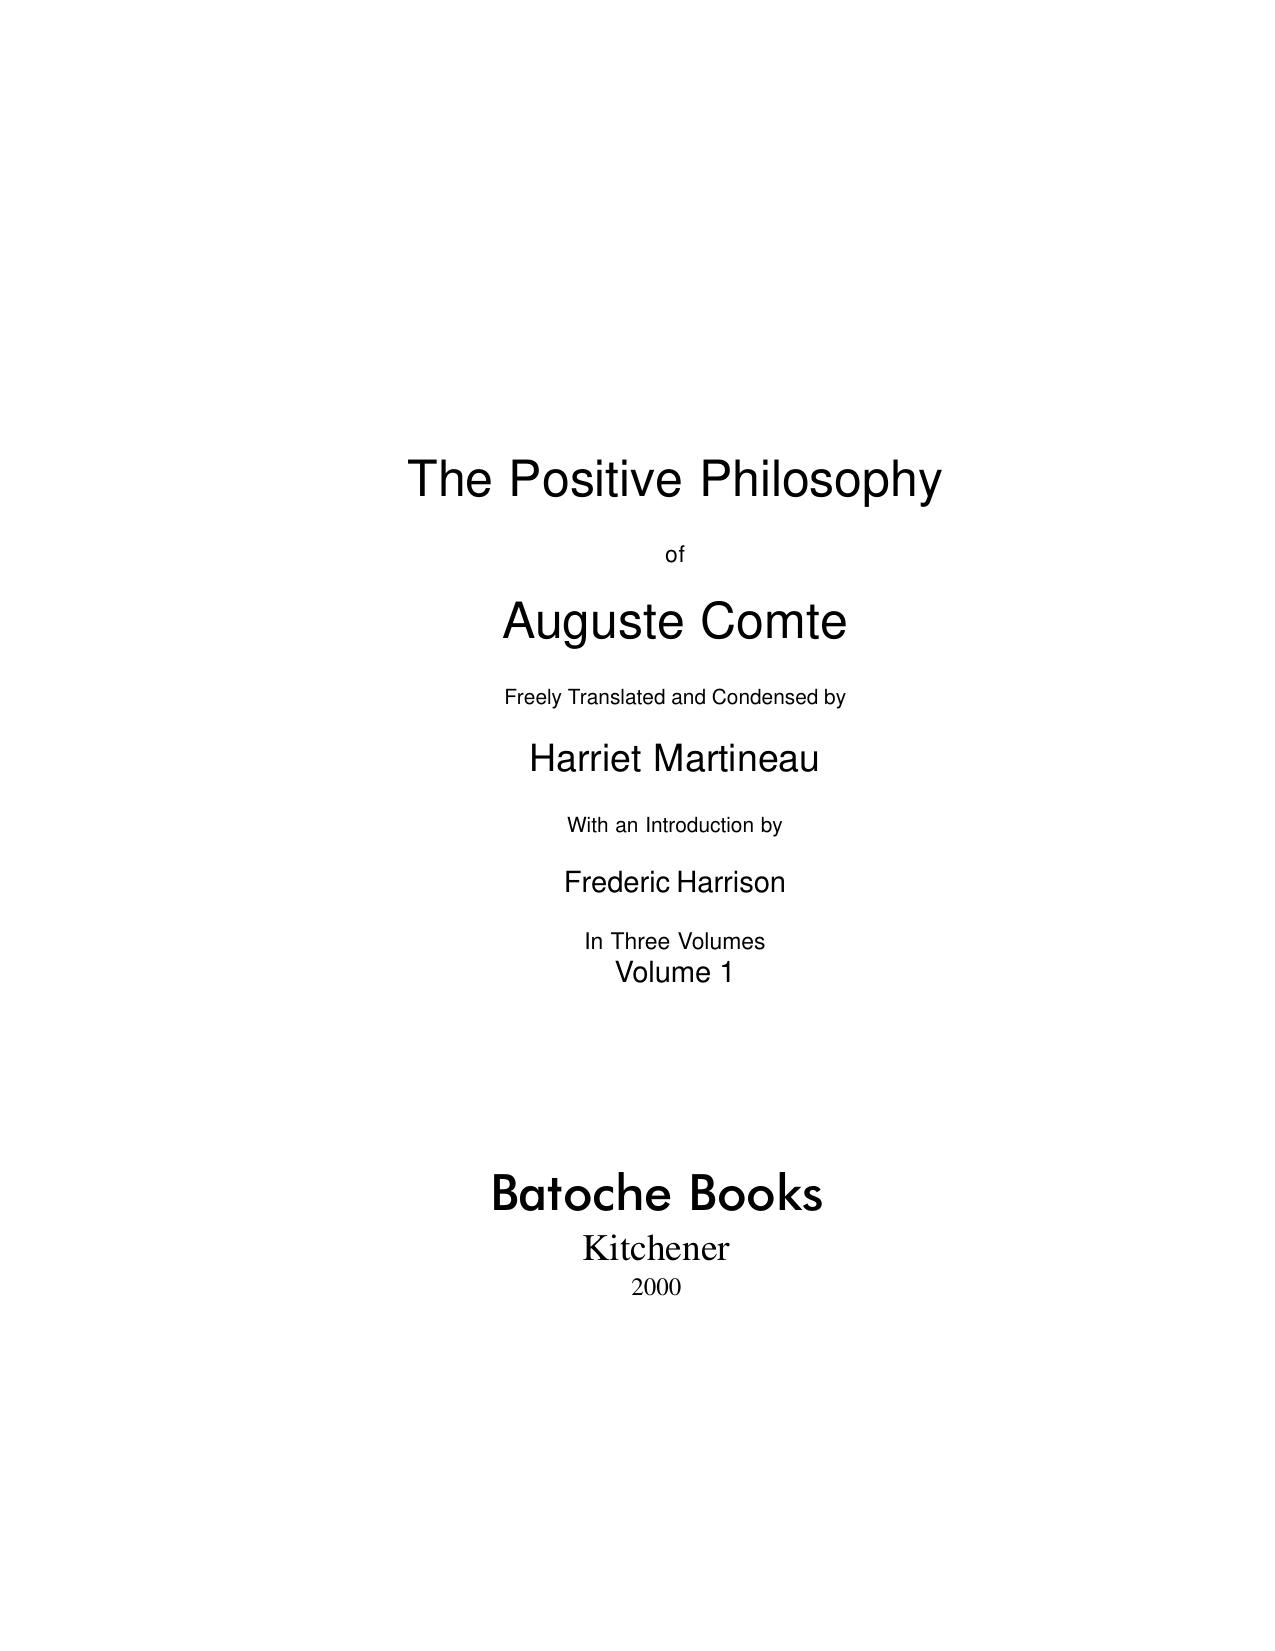 The Positive Philosophy of Auguste Comte V1